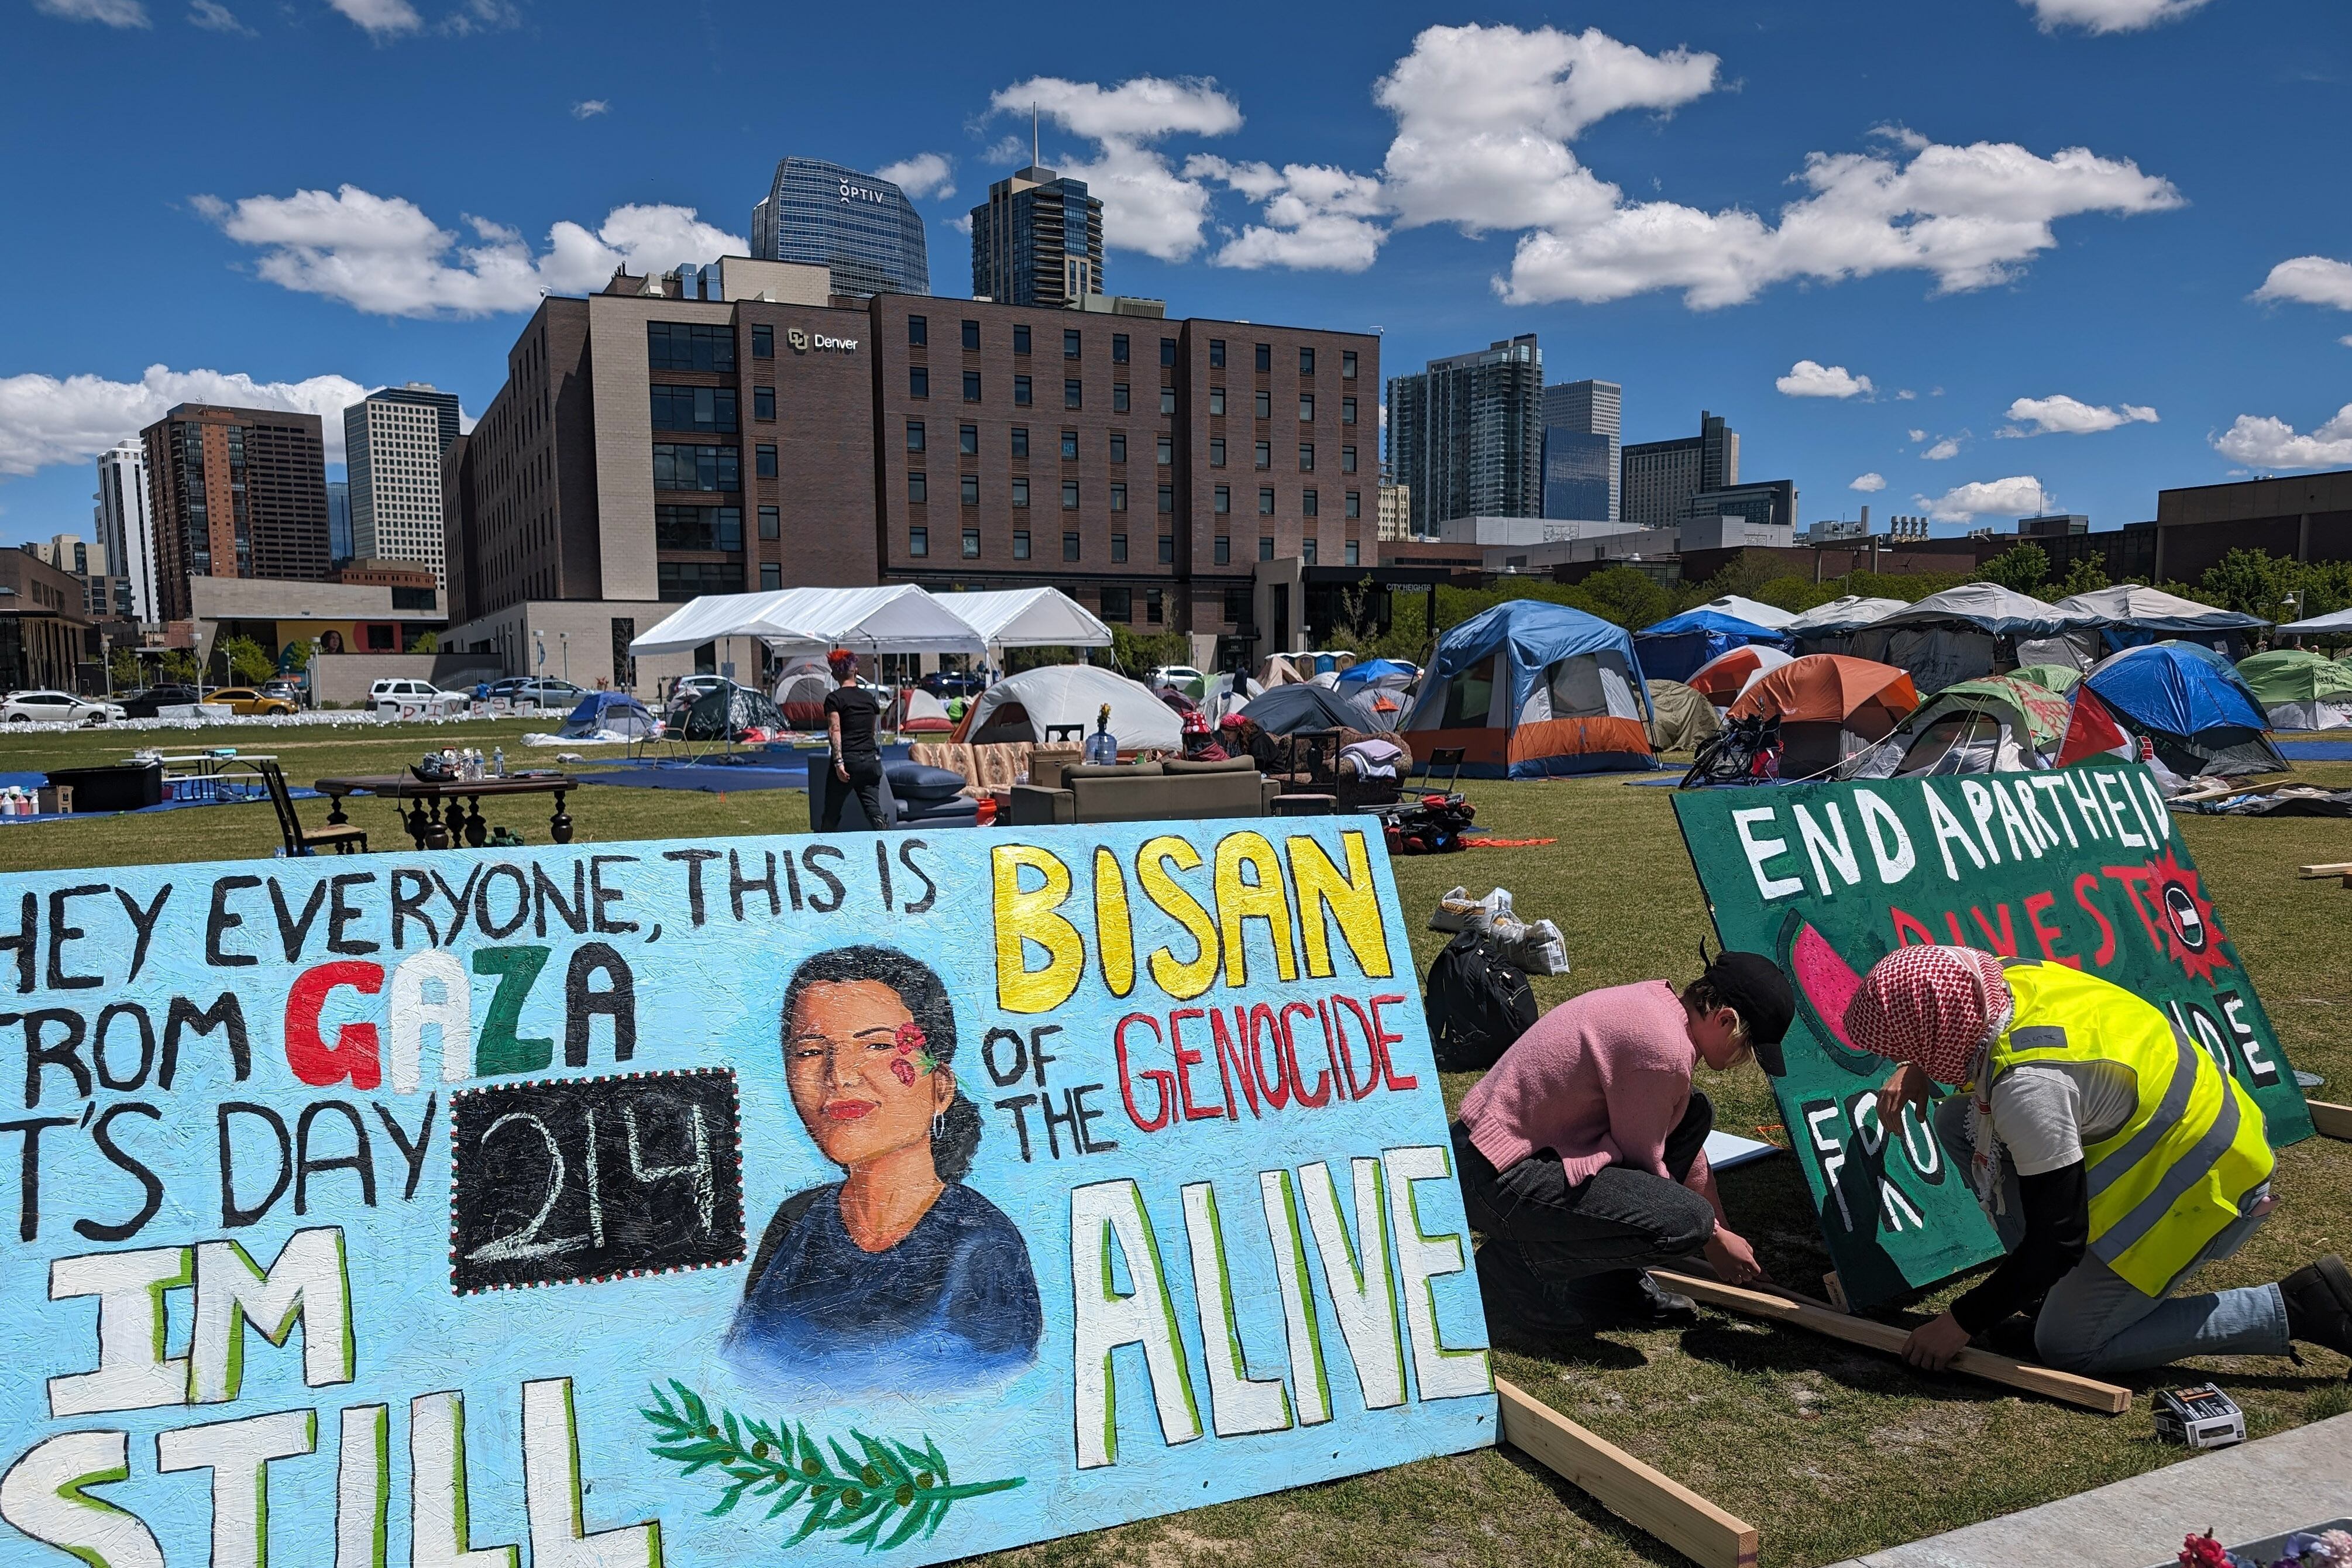 A large hand painted sign with a portrait of Bisan sits on a green lawn with students and buildings in the background.